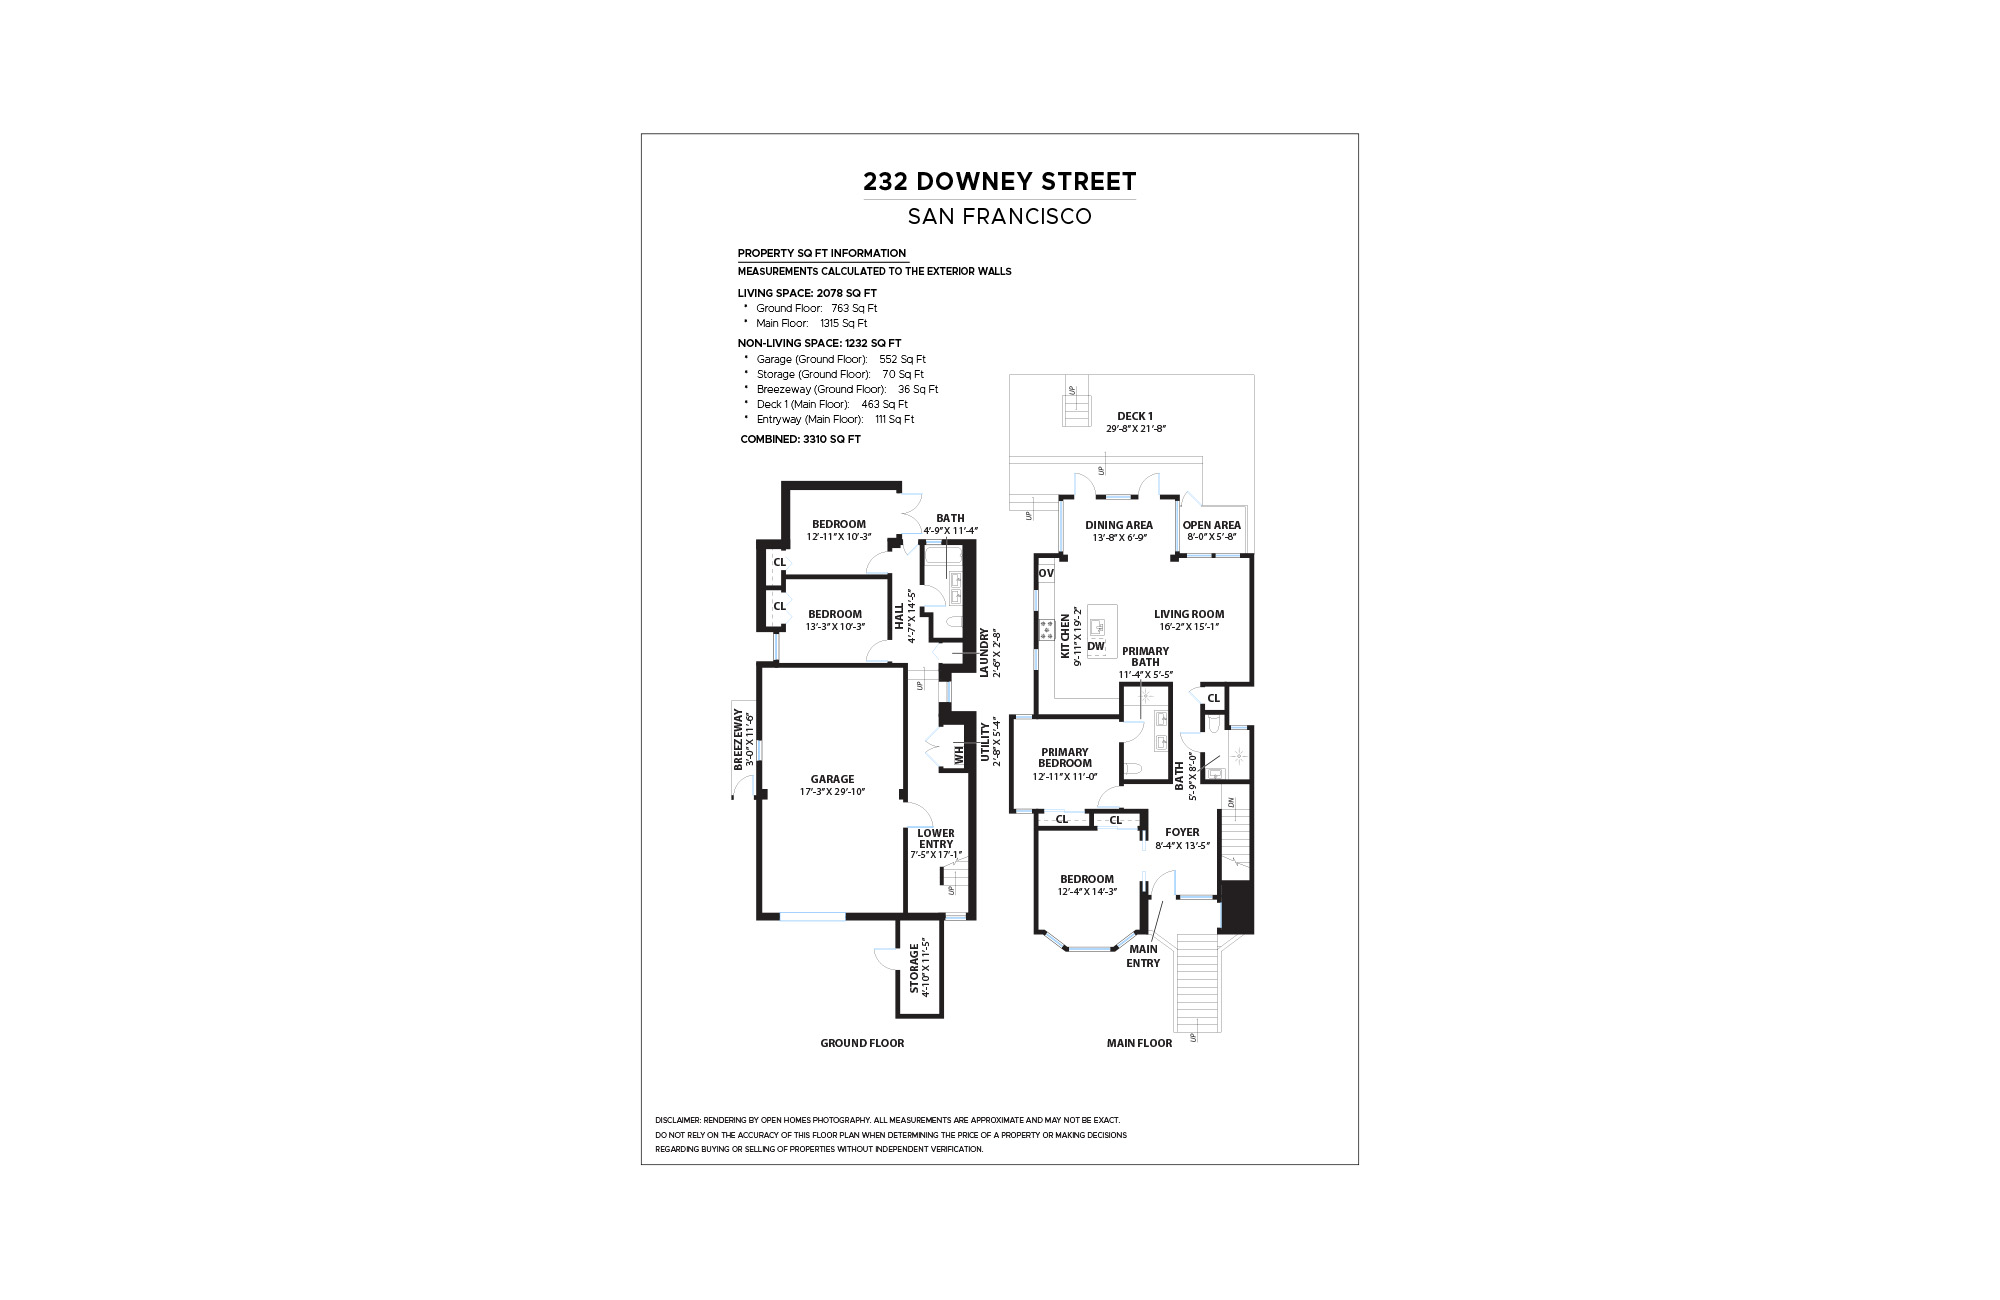 Property Photo: Floor plan by Open Homes for 232 Downey Street.